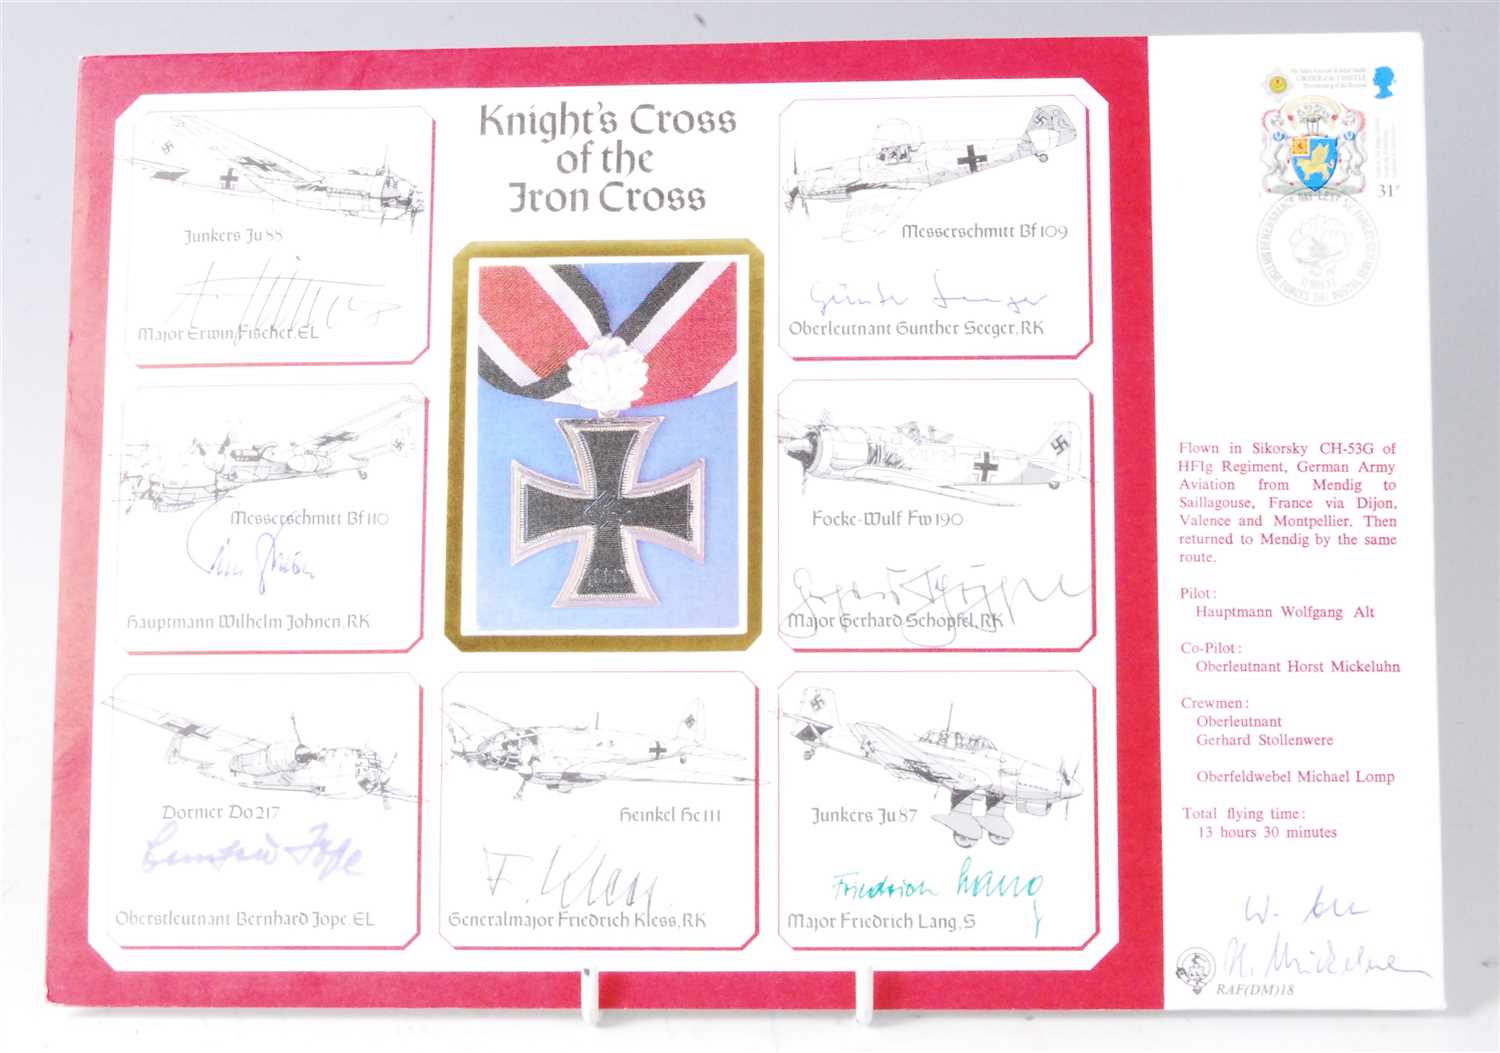 Lot 59 - A DM cover of the Knight's Cross of the Iron Cross